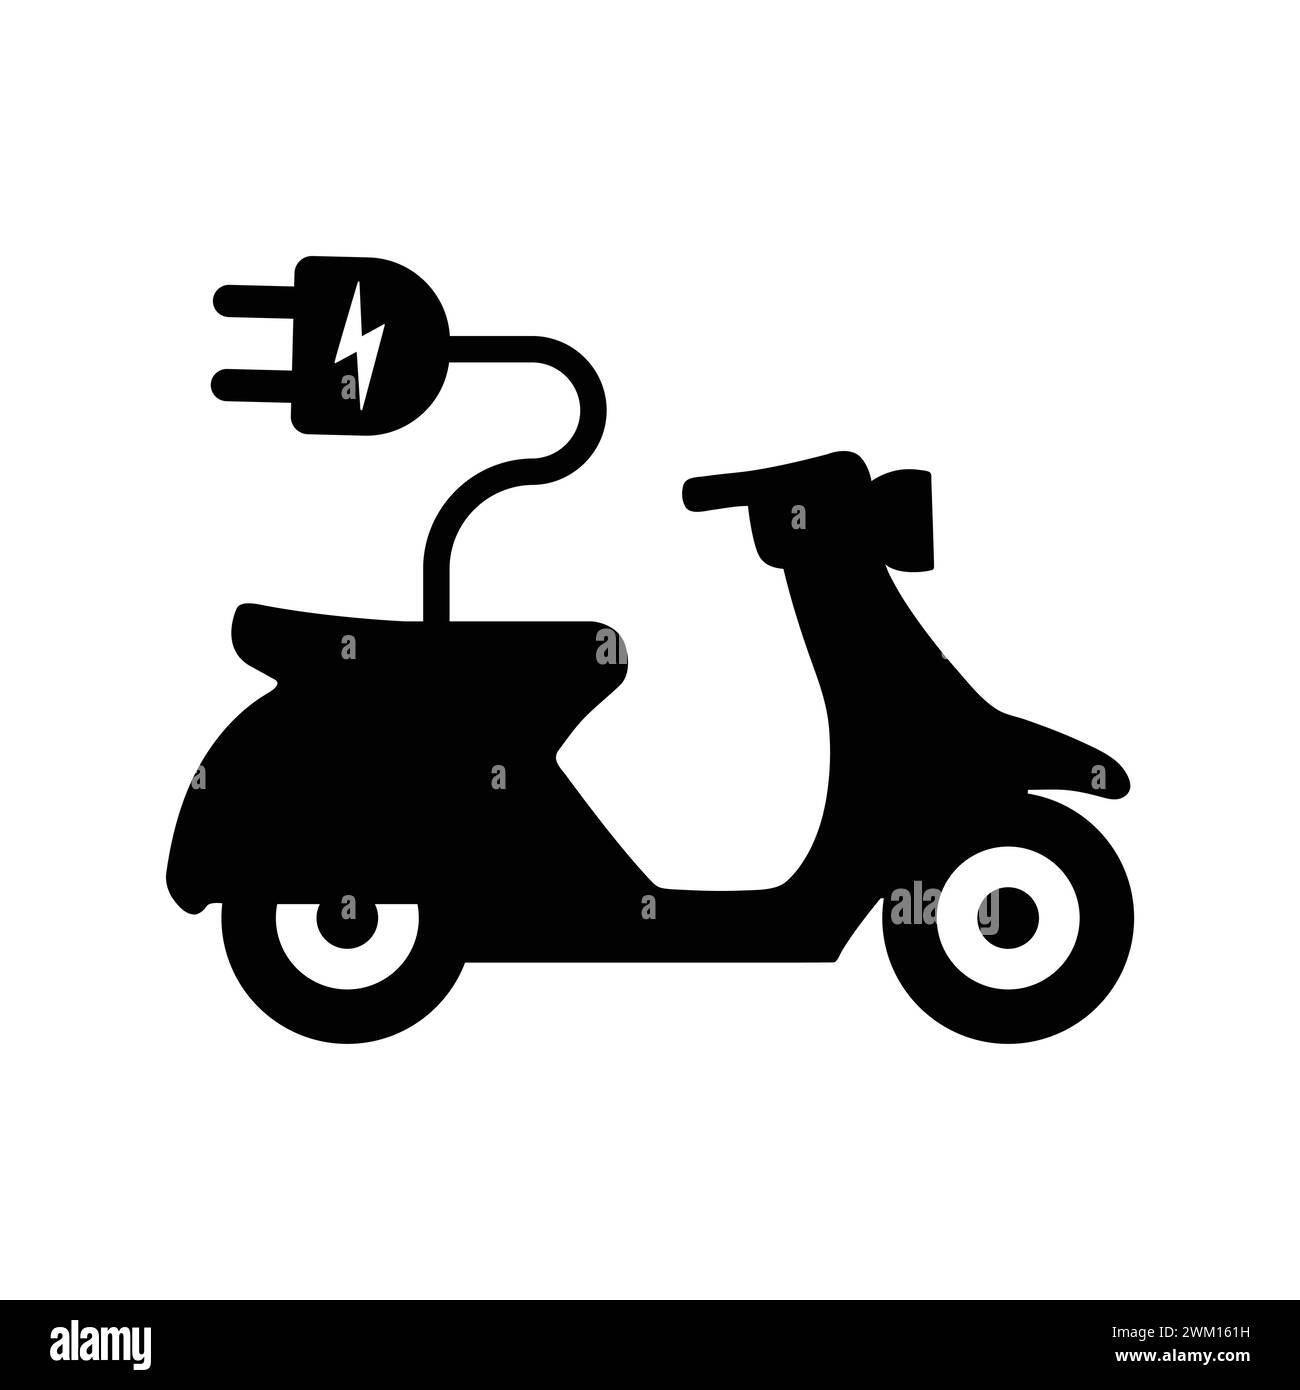 Electric Scooter Icon. Electric Motorcycle With Plug. Motorcycle Pictogram Vector Illustration. Moped Or Motorbike Silhouette Eco-Friendly Transport Stock Vector